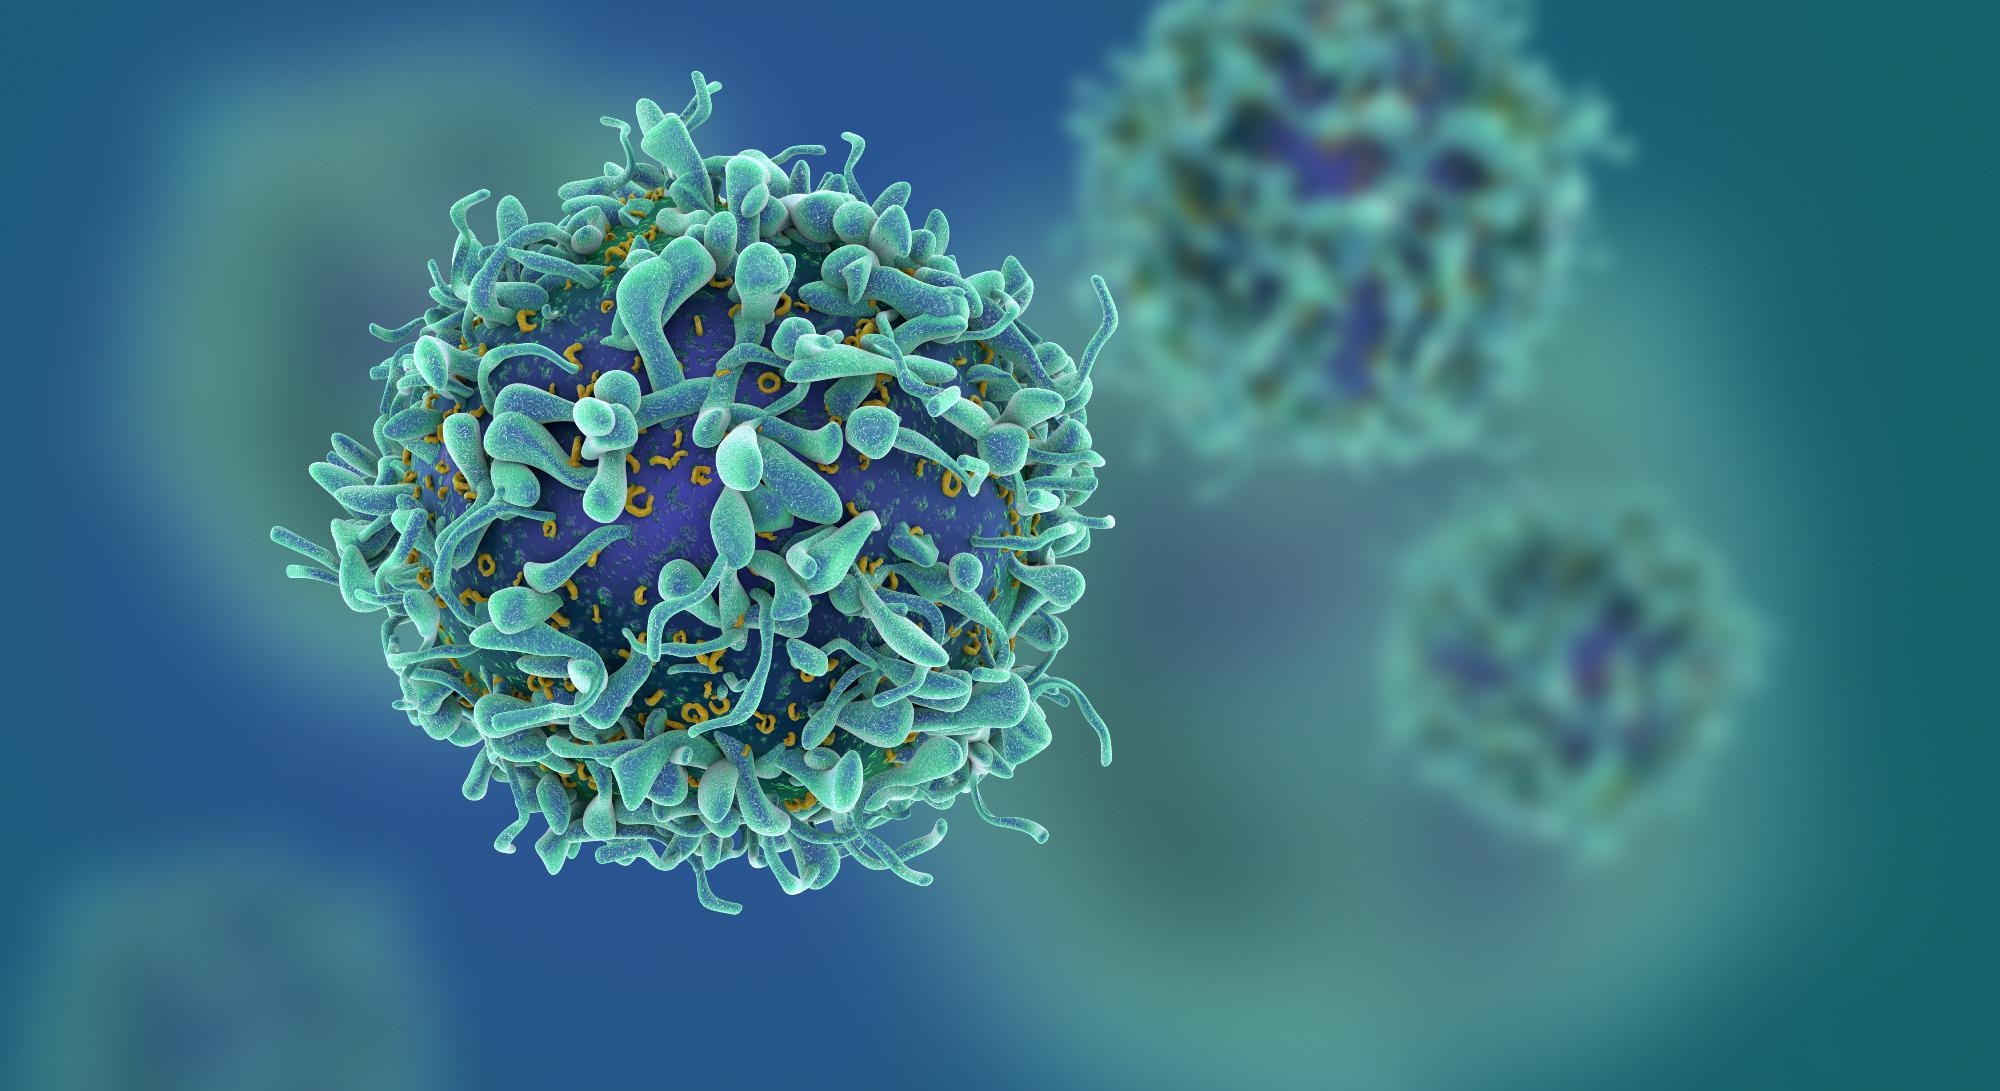 Study: Predictions of immunogenicity reveal potent SARS-CoV-2 CD8+ T-cell epitopes. Image Credit: fusebulb / Shutterstock